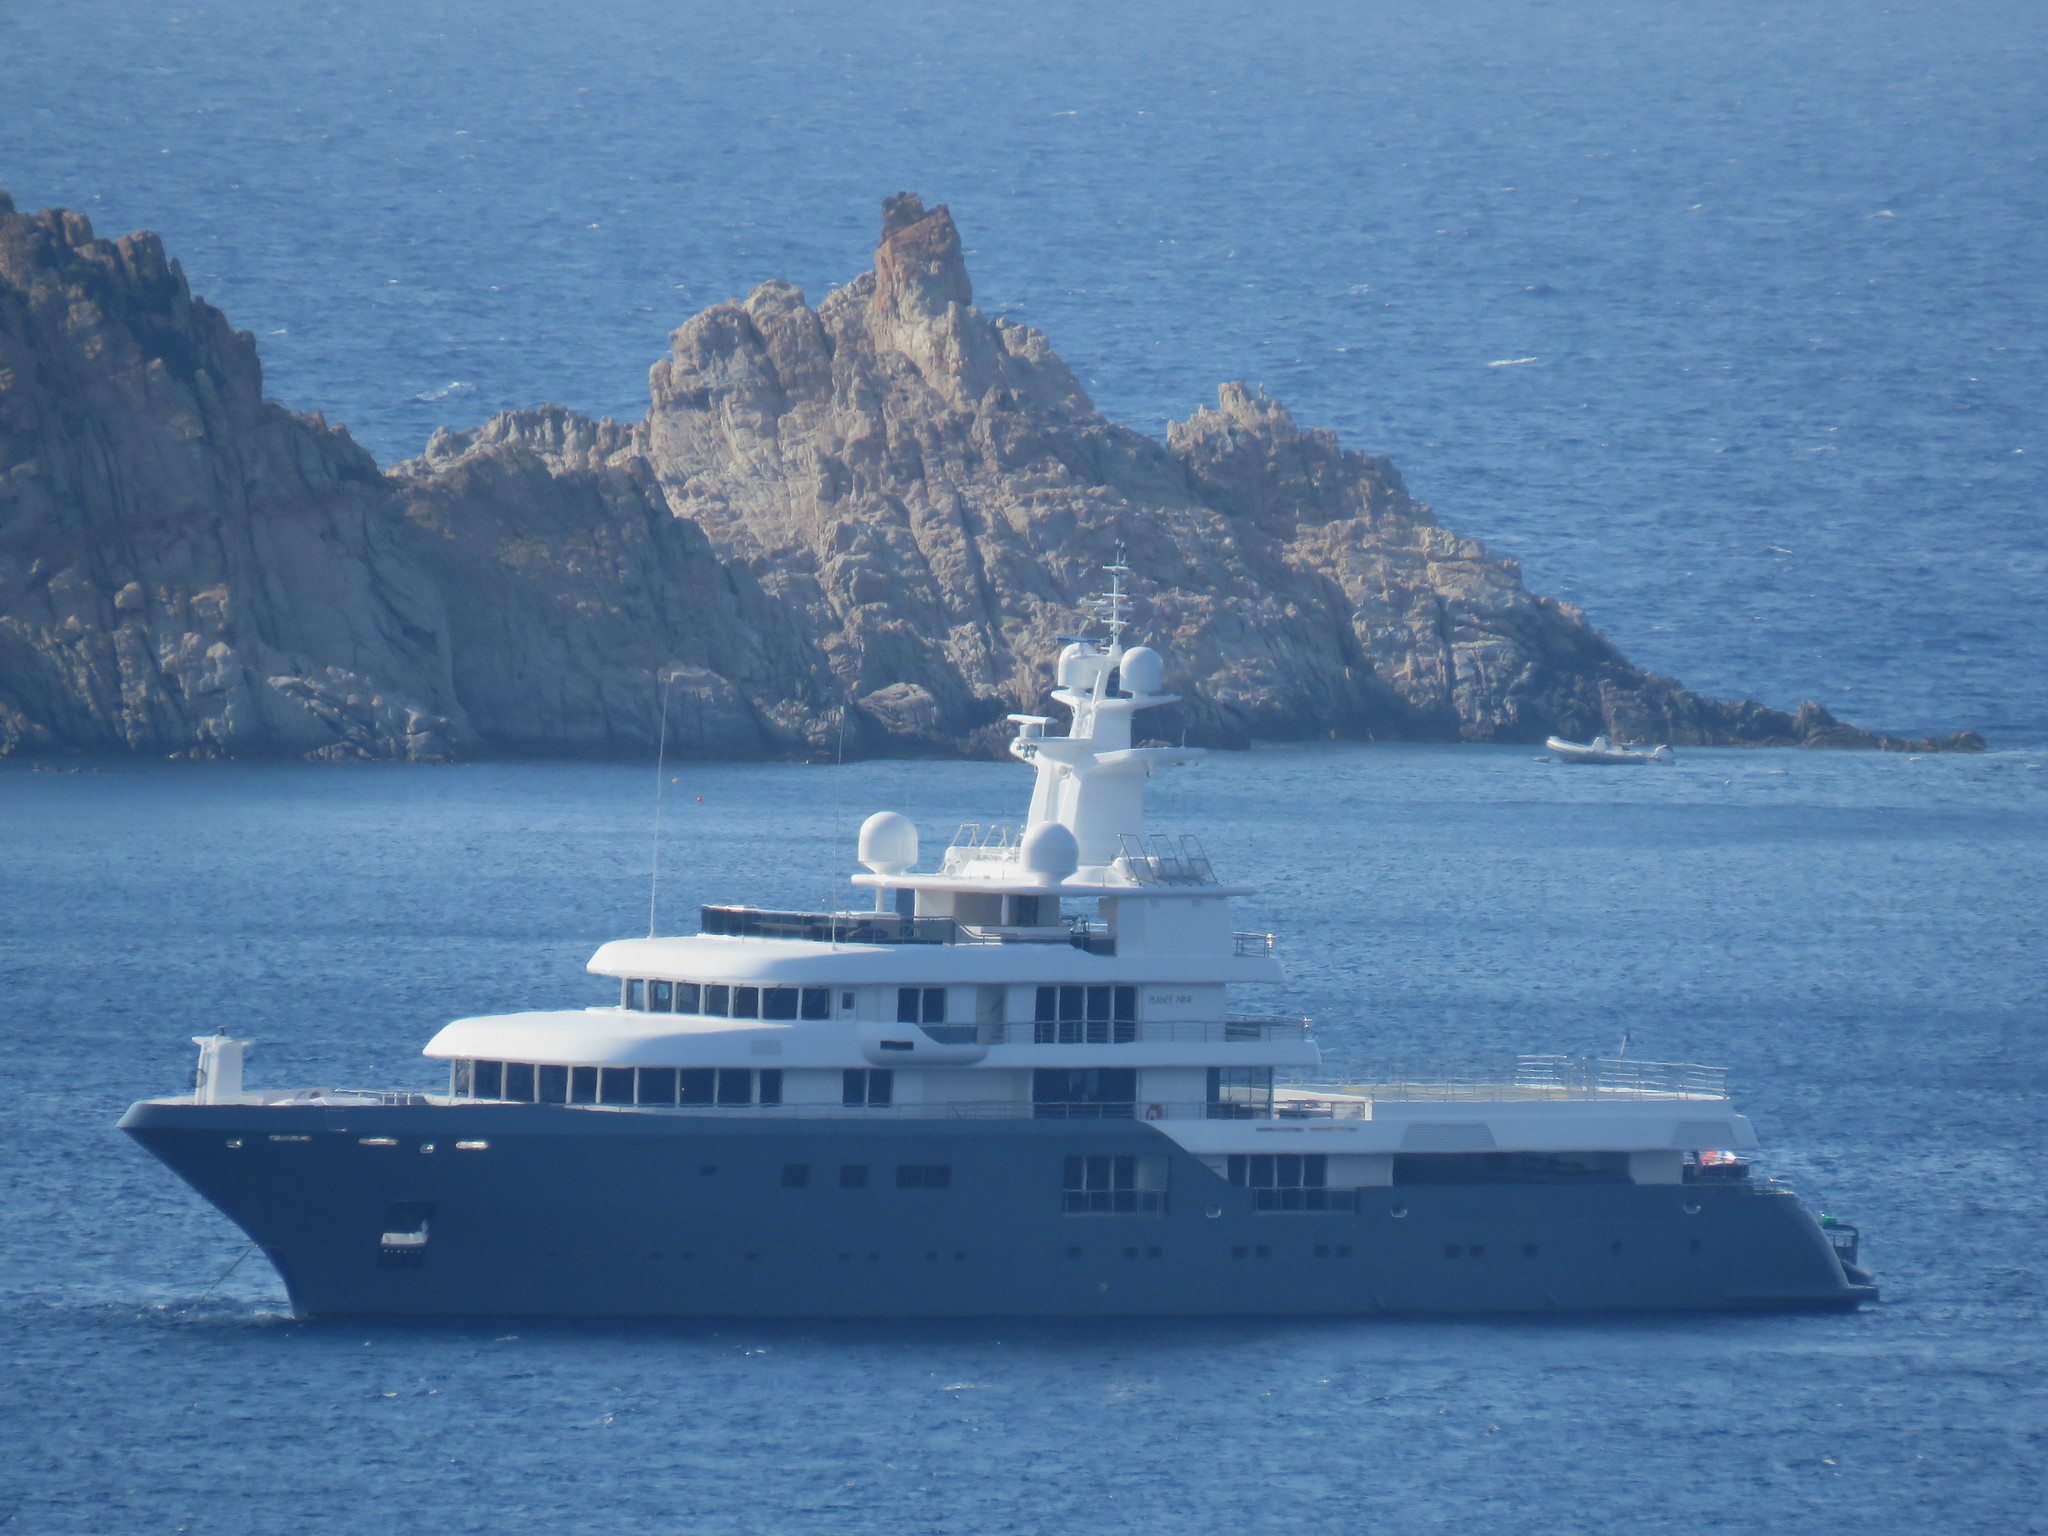 <p>Most yachts are at home in Sicily or the Caribbean. <em>Planet Nine</em> was built to brave the seas around Antarctica and Greenland—anywhere the waves could possibly take it. It was also in Christopher Nolan's <em>Tenet</em> so...enough said.</p>